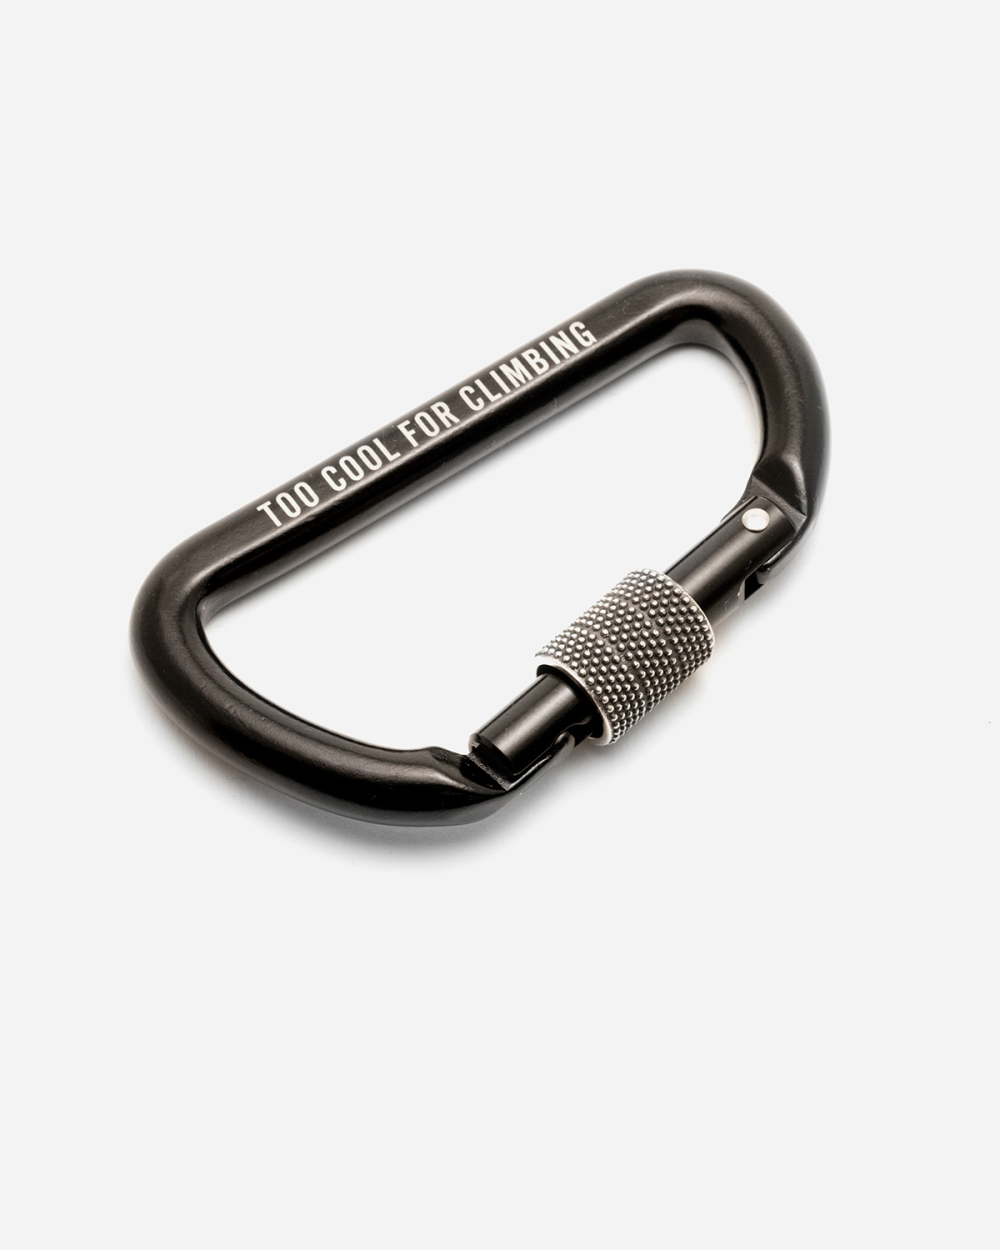 DOTTED KEY CHAIN CARABINER